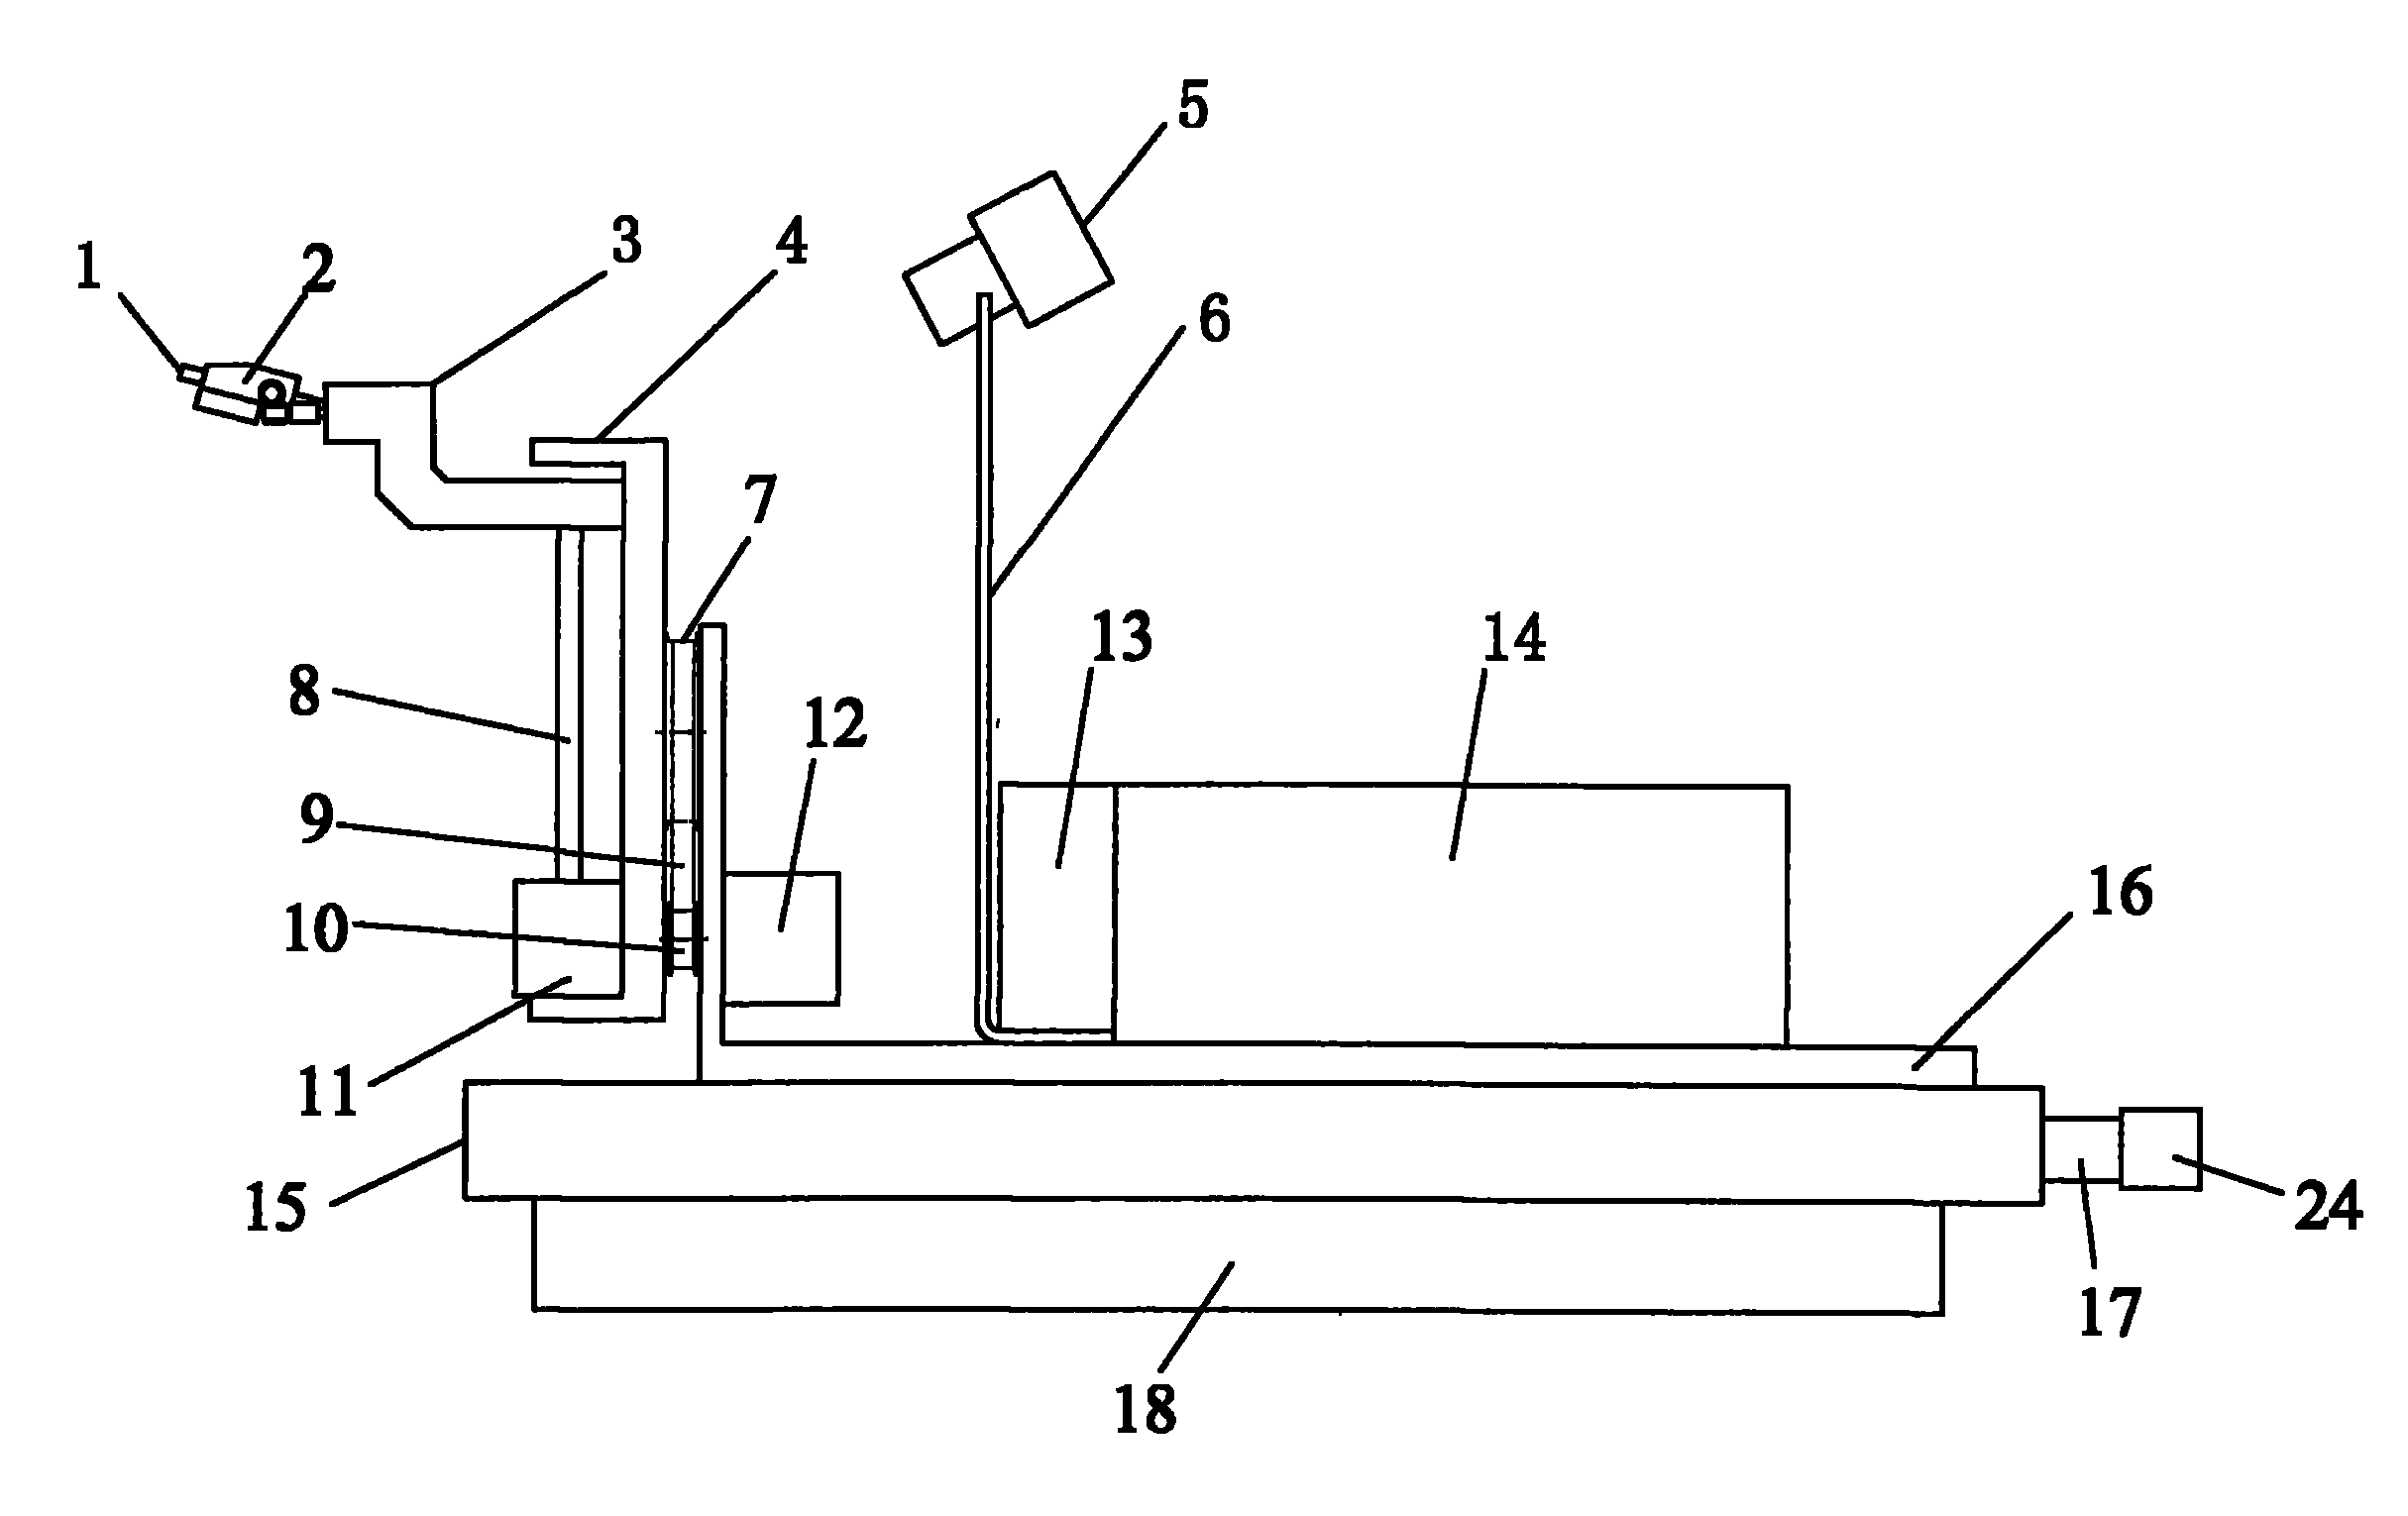 Four-dimensional self-adaptive insulation piece surface charge measuring device